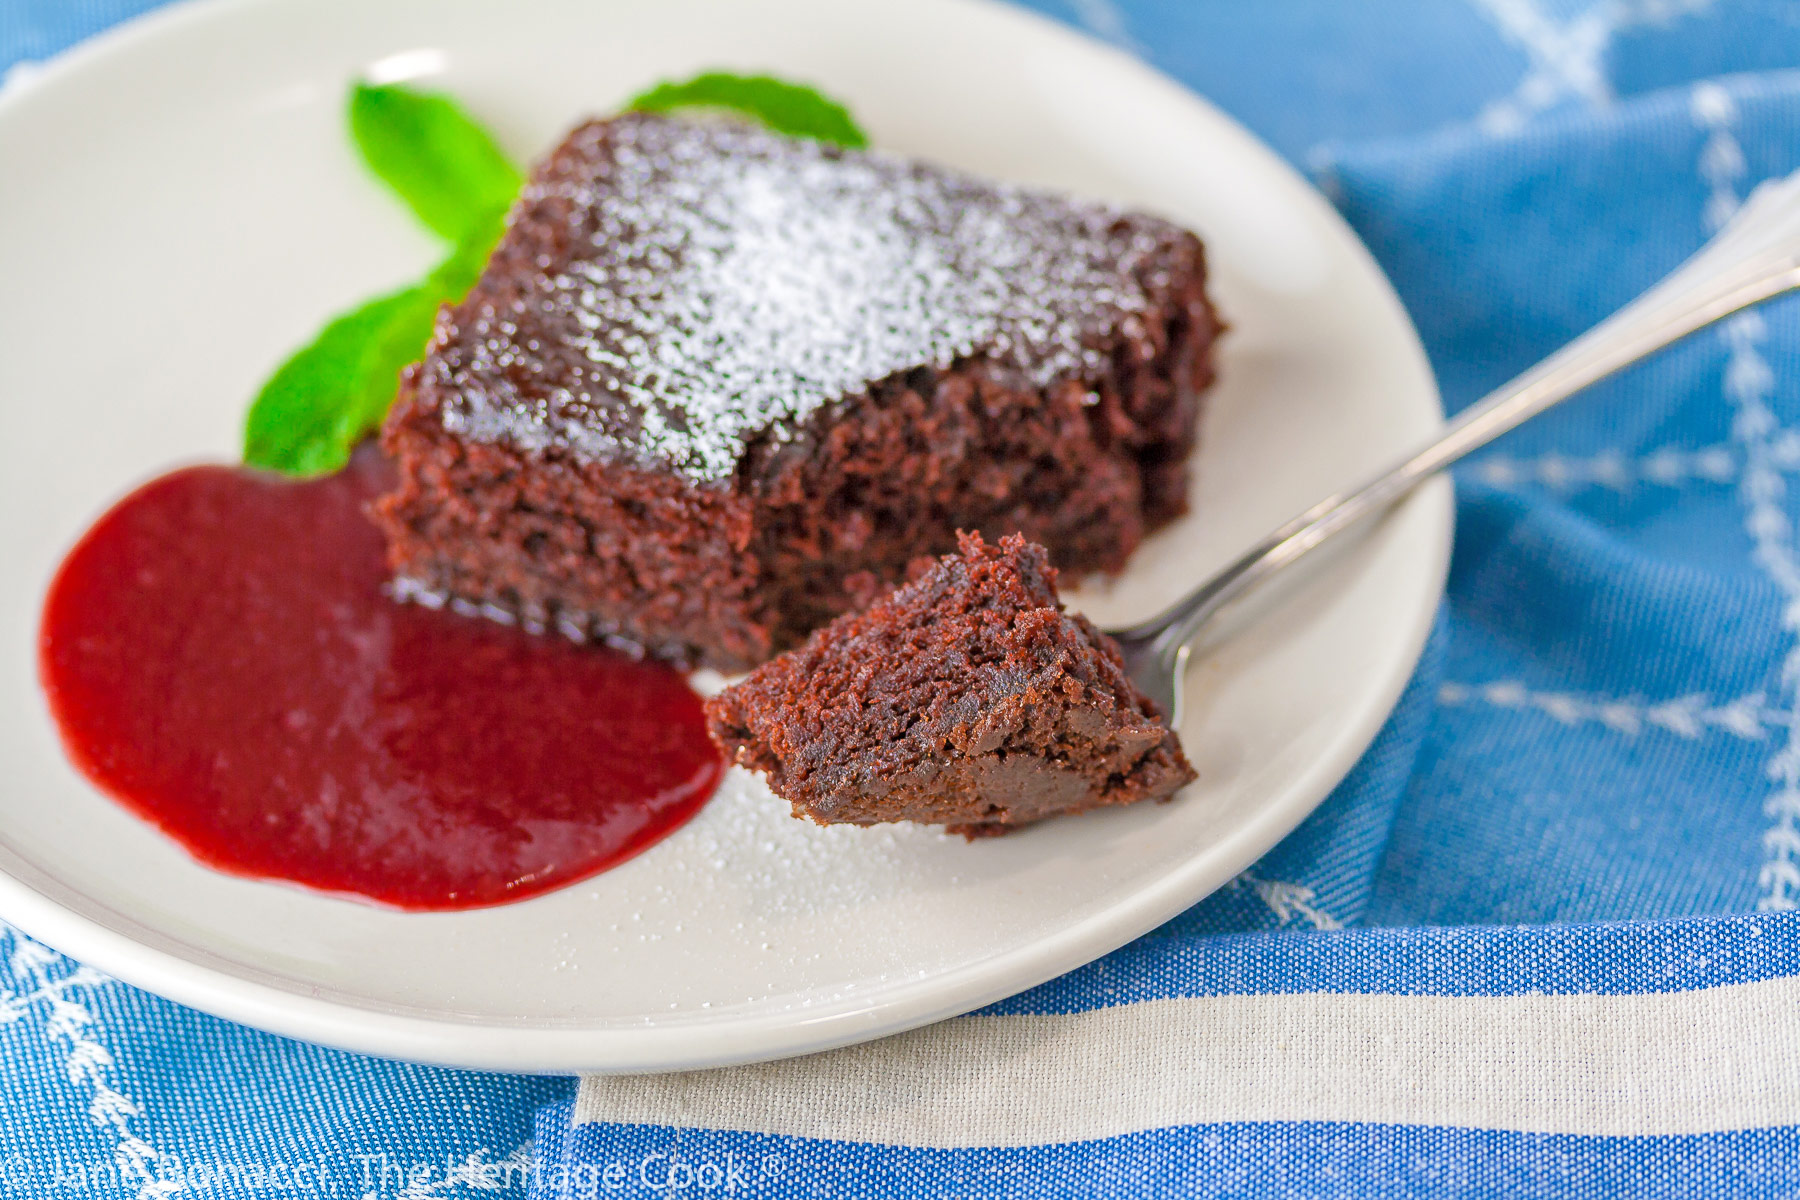 Square slice of chocolate cake surrounded by red raspberry sauce on a white plate with a mint sprig on blue background; Luscious Chocolate Cake with Raspberry Sauce © 2023 Jane Bonacci, The Heritage Cook.